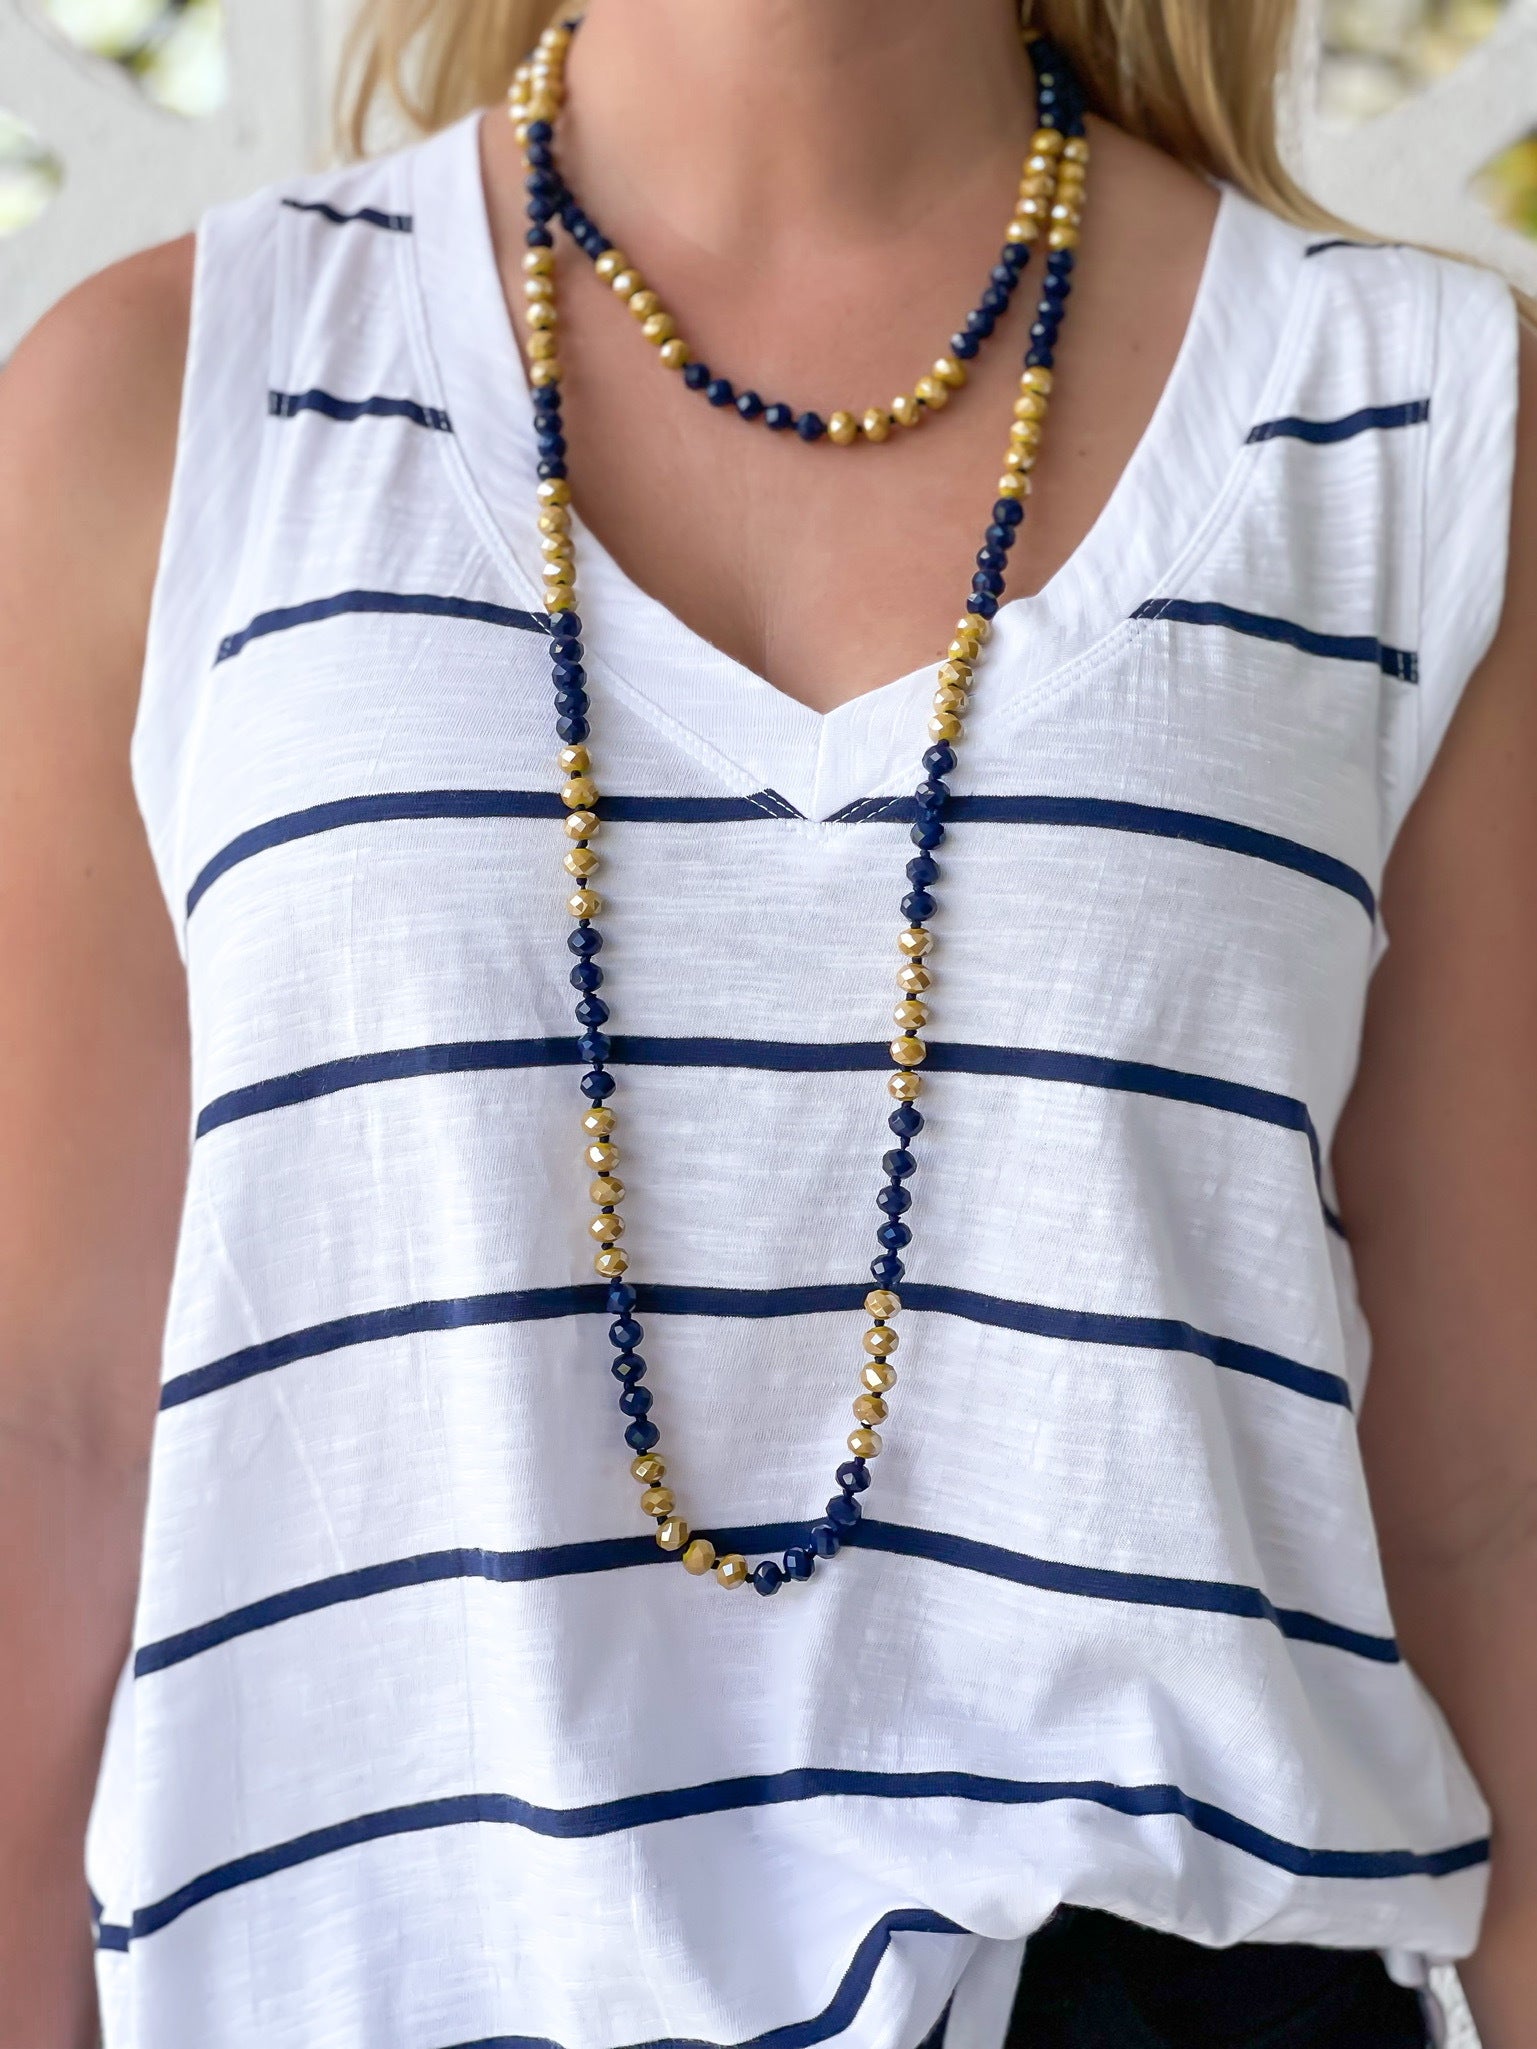 Endless Beaded Long Necklace - Navy Blue & Gold